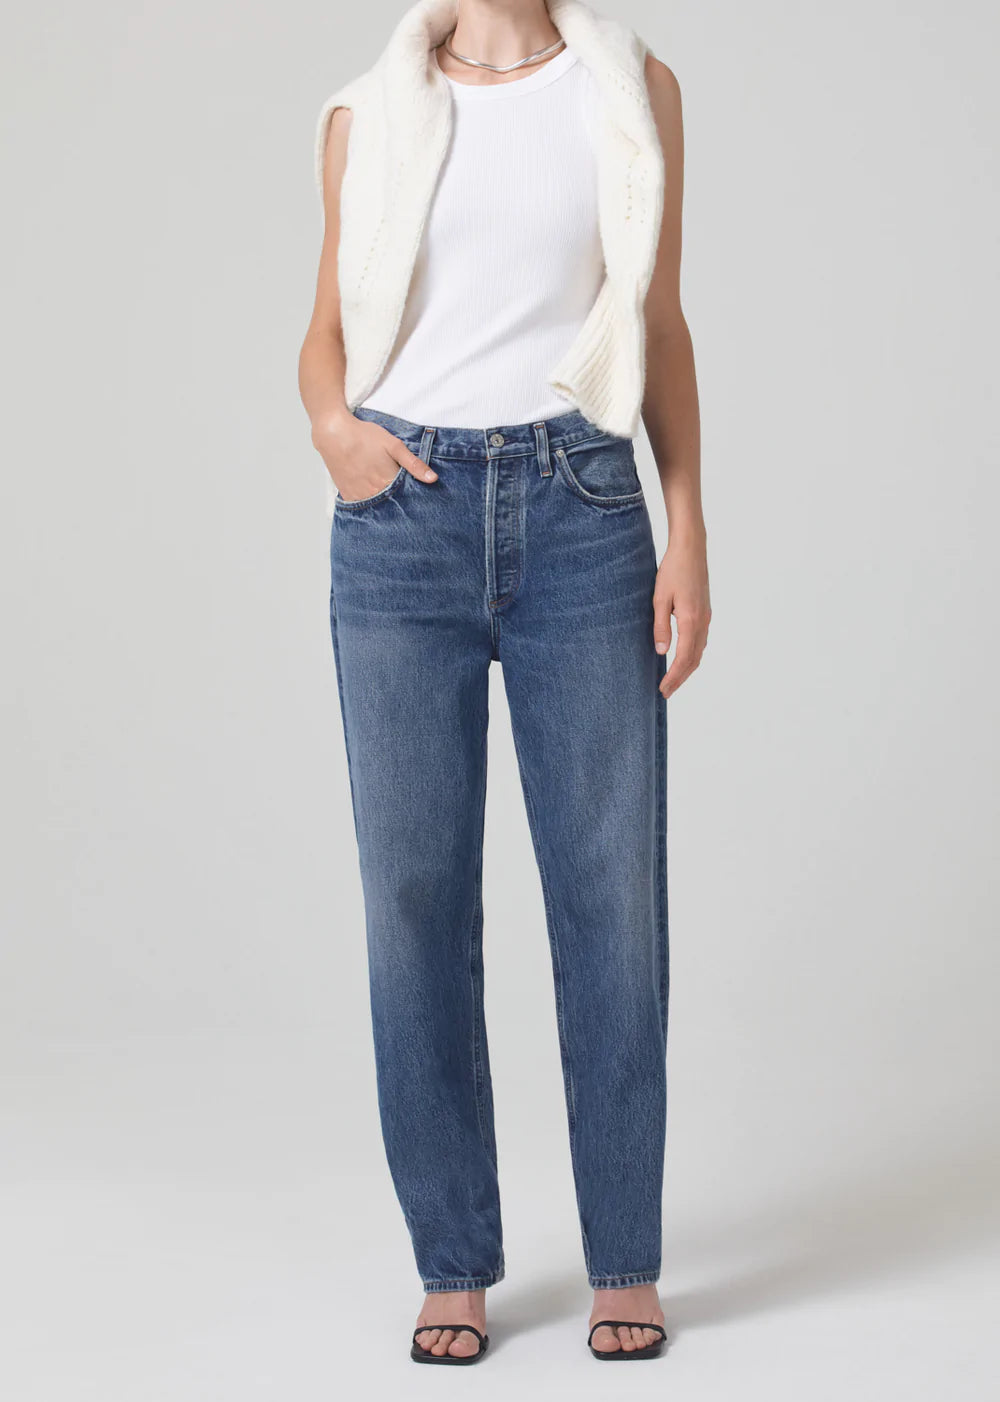 Devi high-rise tapered jeans in white - Citizens Of Humanity